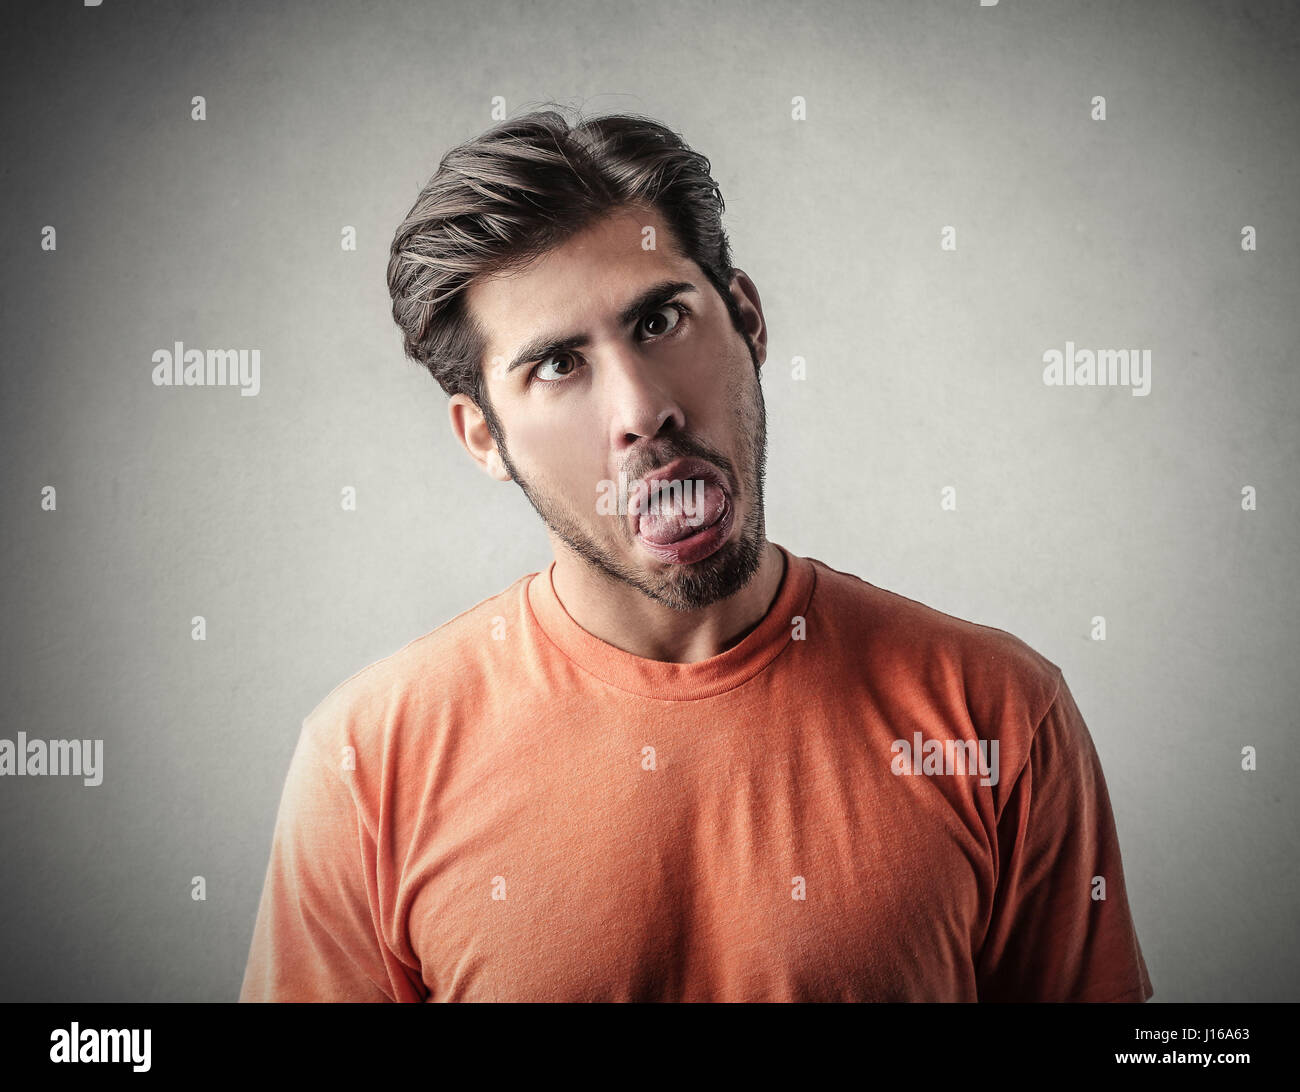 Young man making a grimace Stock Photo